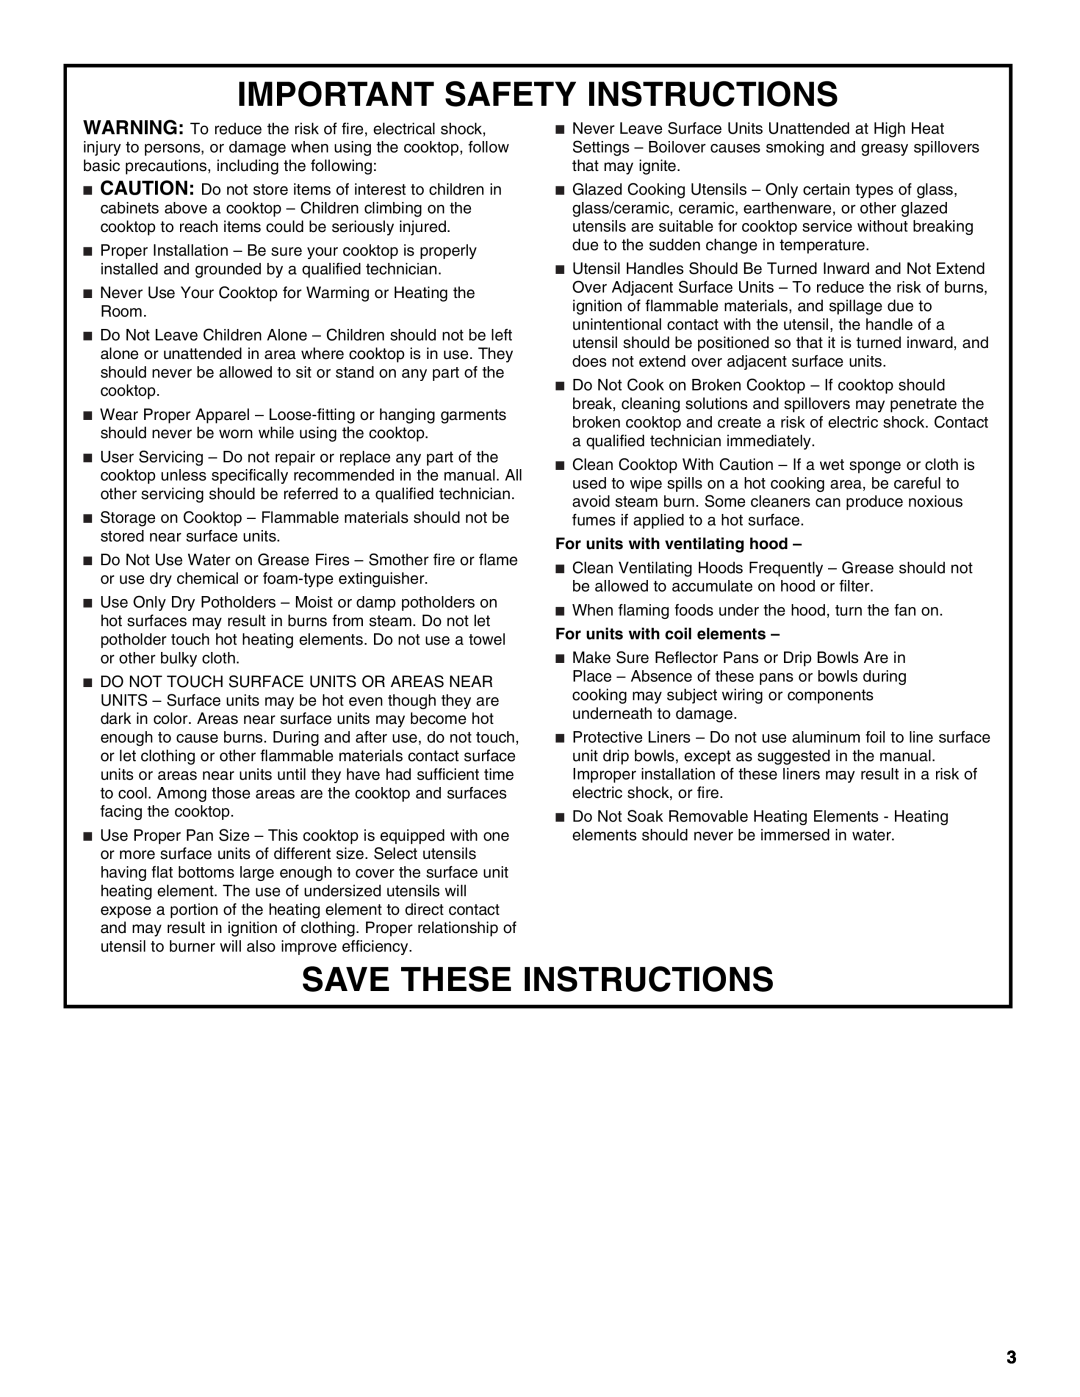 Whirlpool G7CE3034XB, G7CE3034XS Important Safety Instructions, Save These Instructions, For units with ventilating hood 